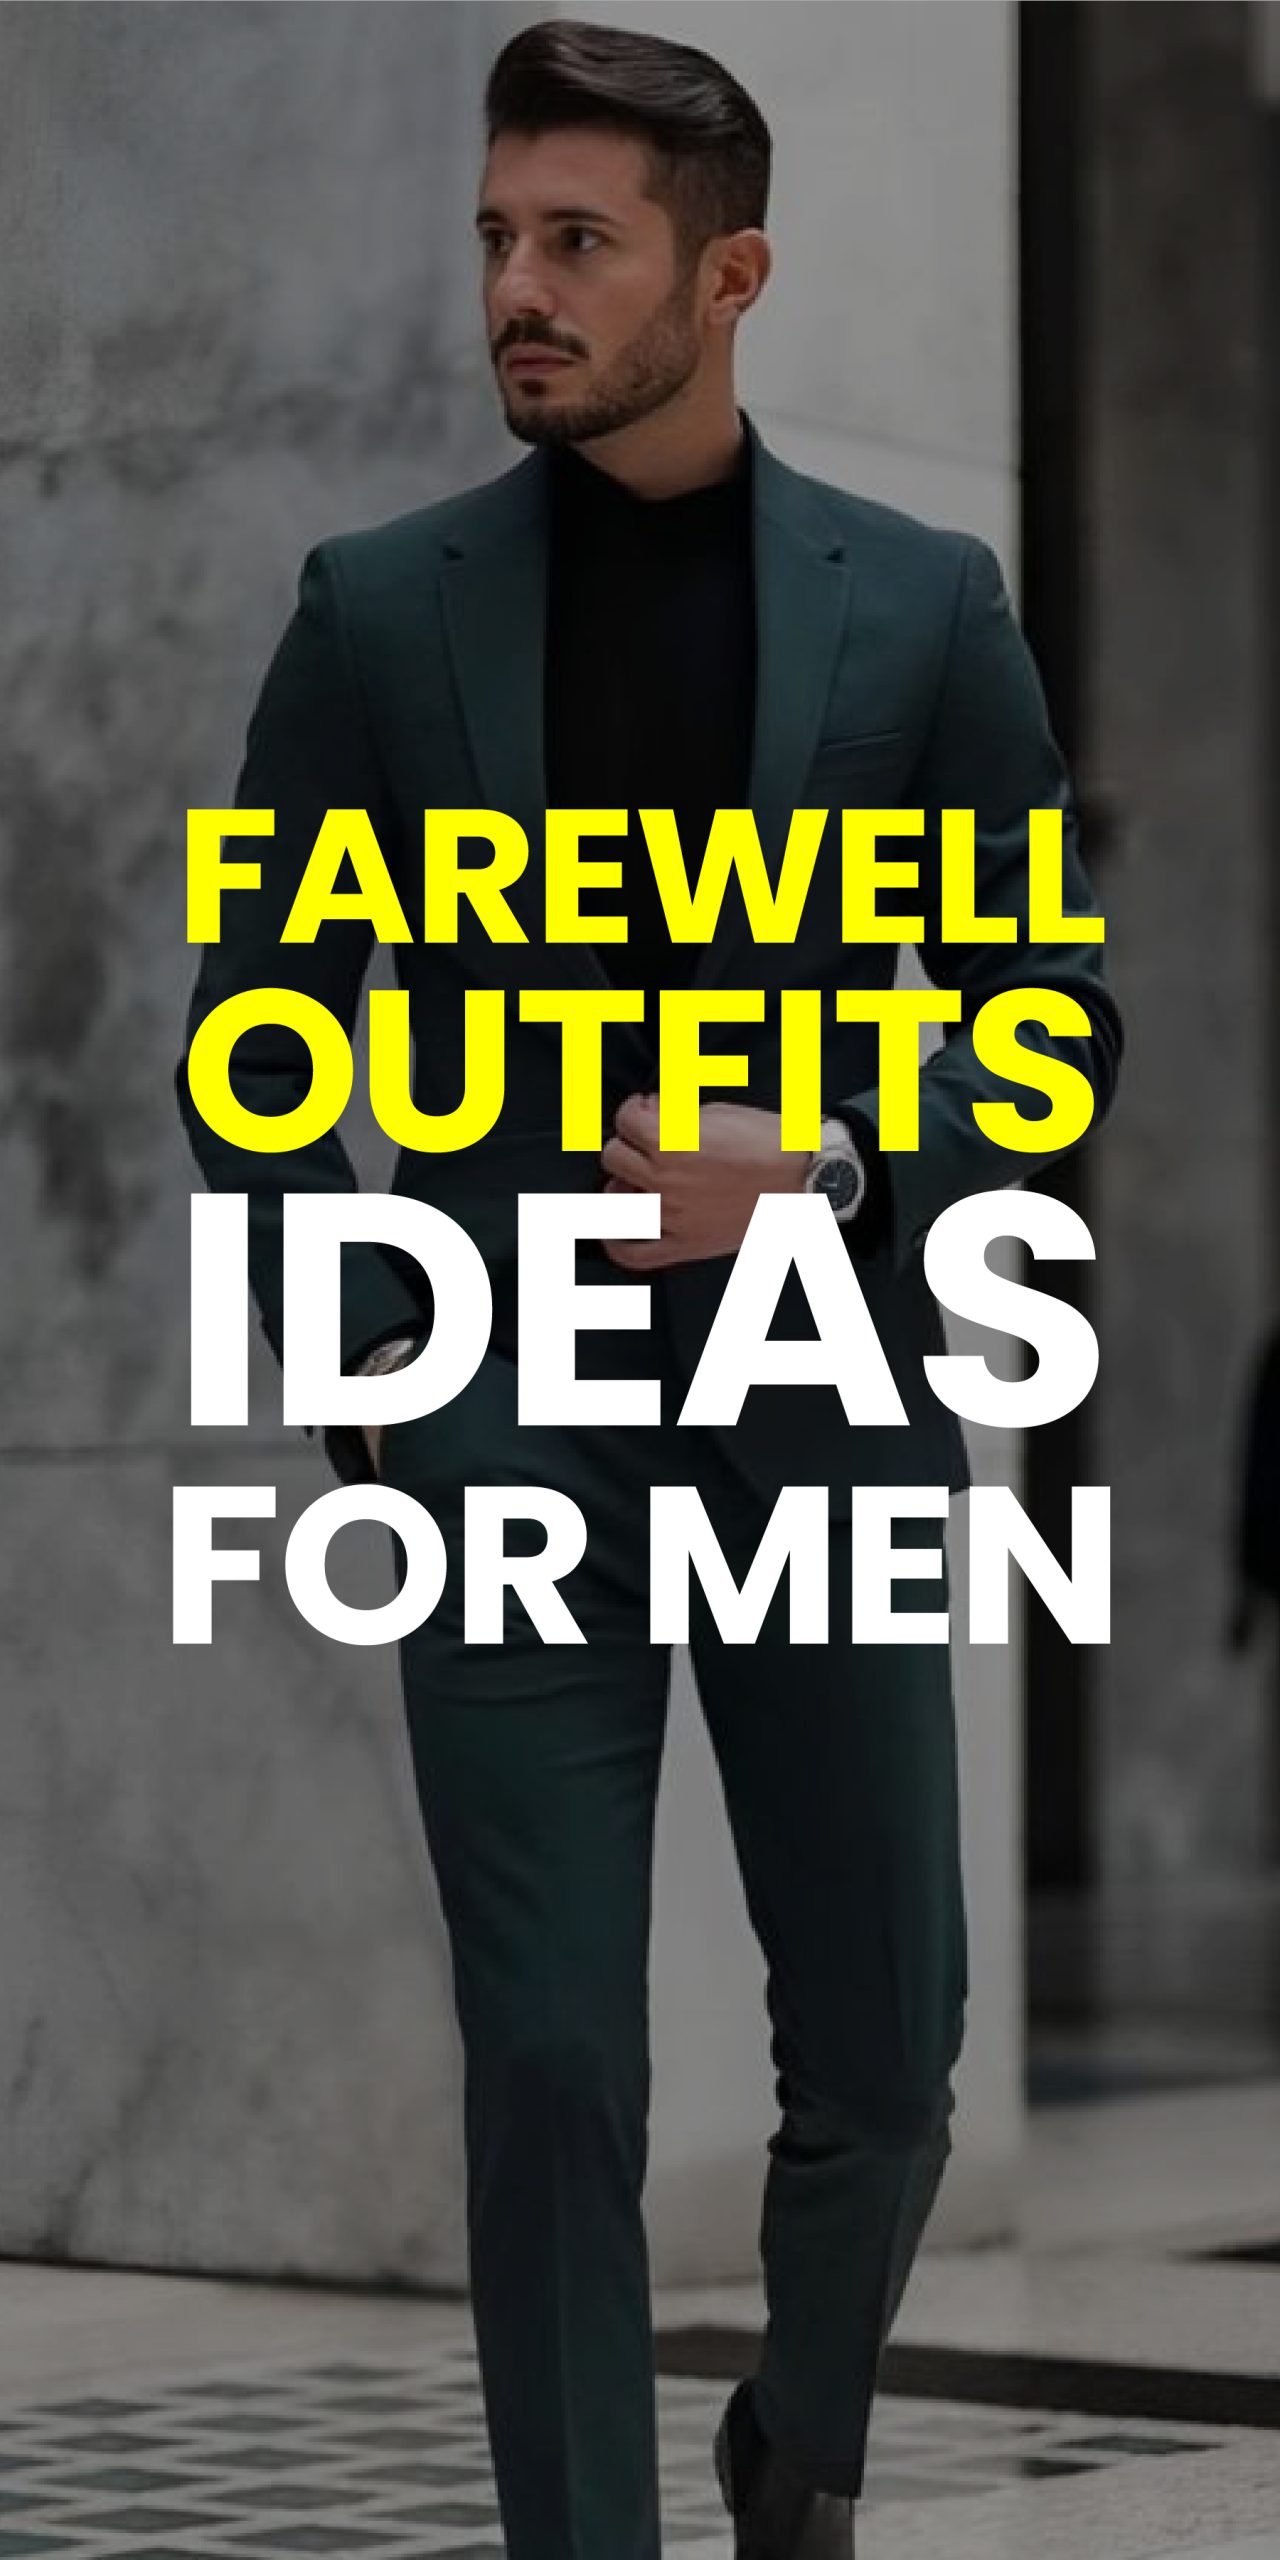 FAREWELL OUTFIT IDEAS FOR MEN